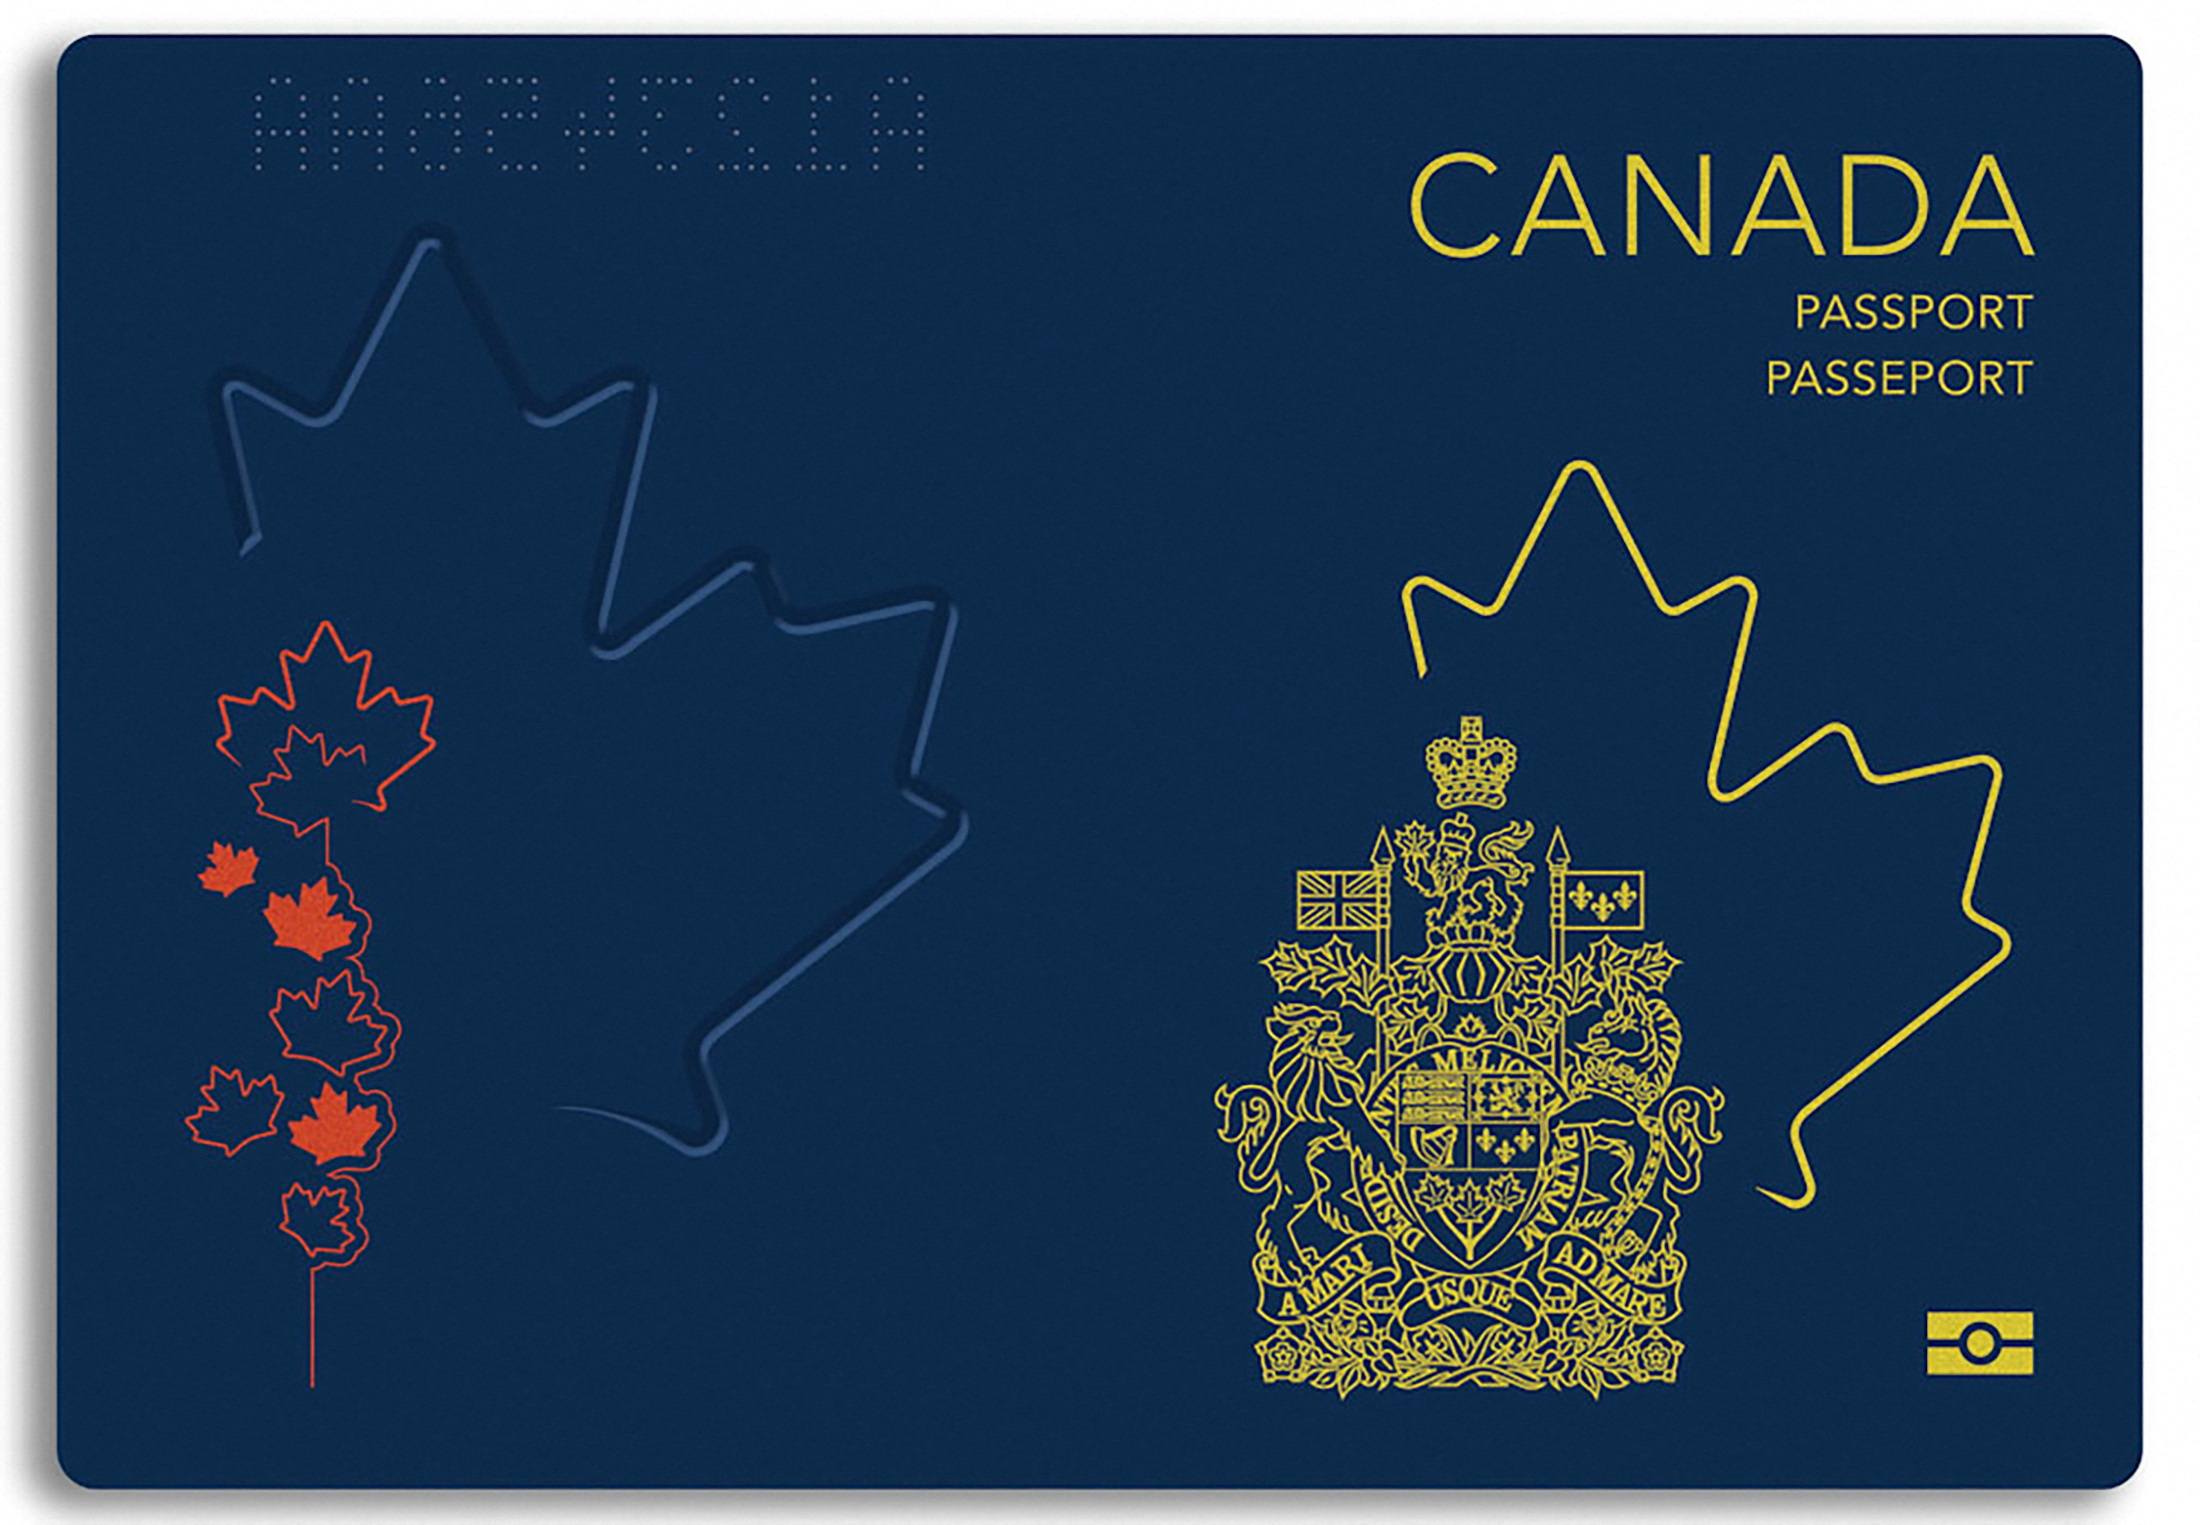 Canada unveils new passport design with more security features, nod to